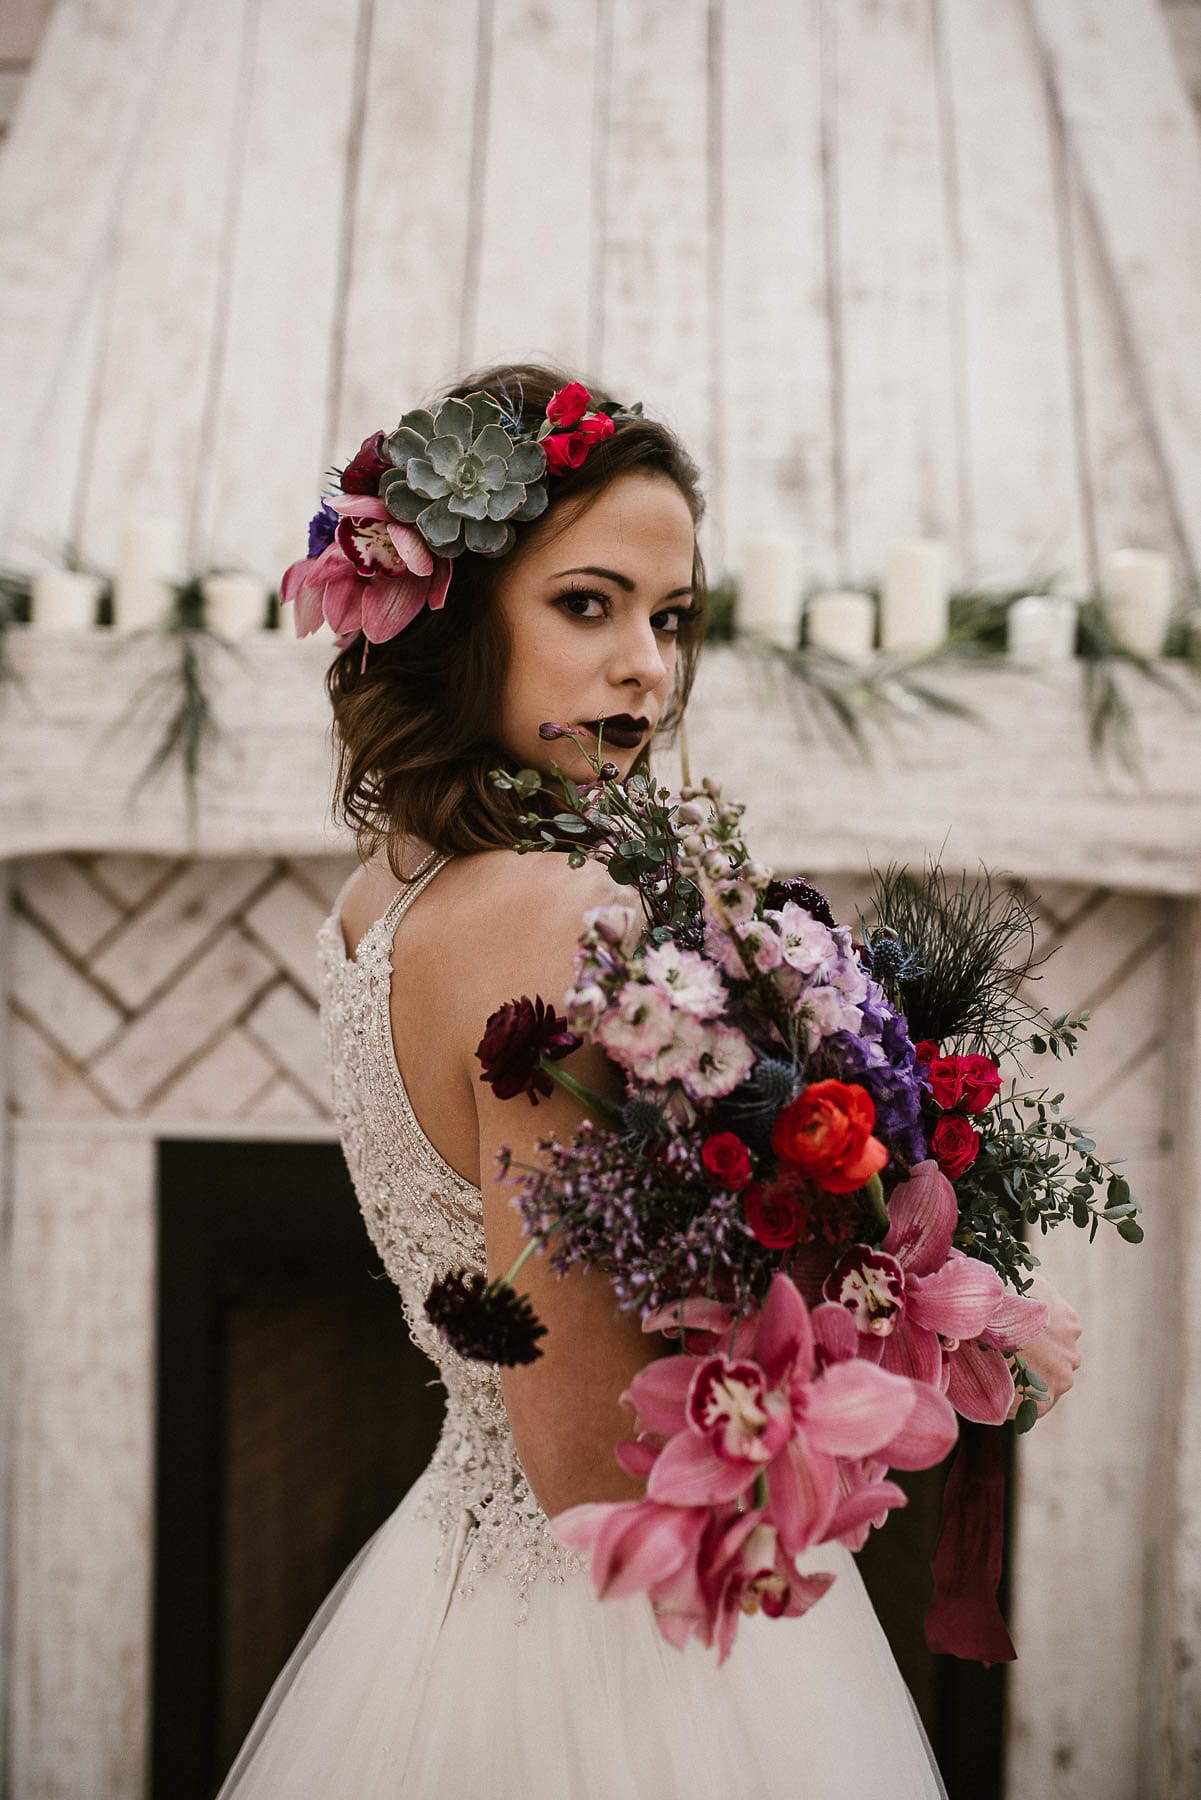 Princess Wedding Dress in Moody Styled Shoot With Jewel-toned Florals